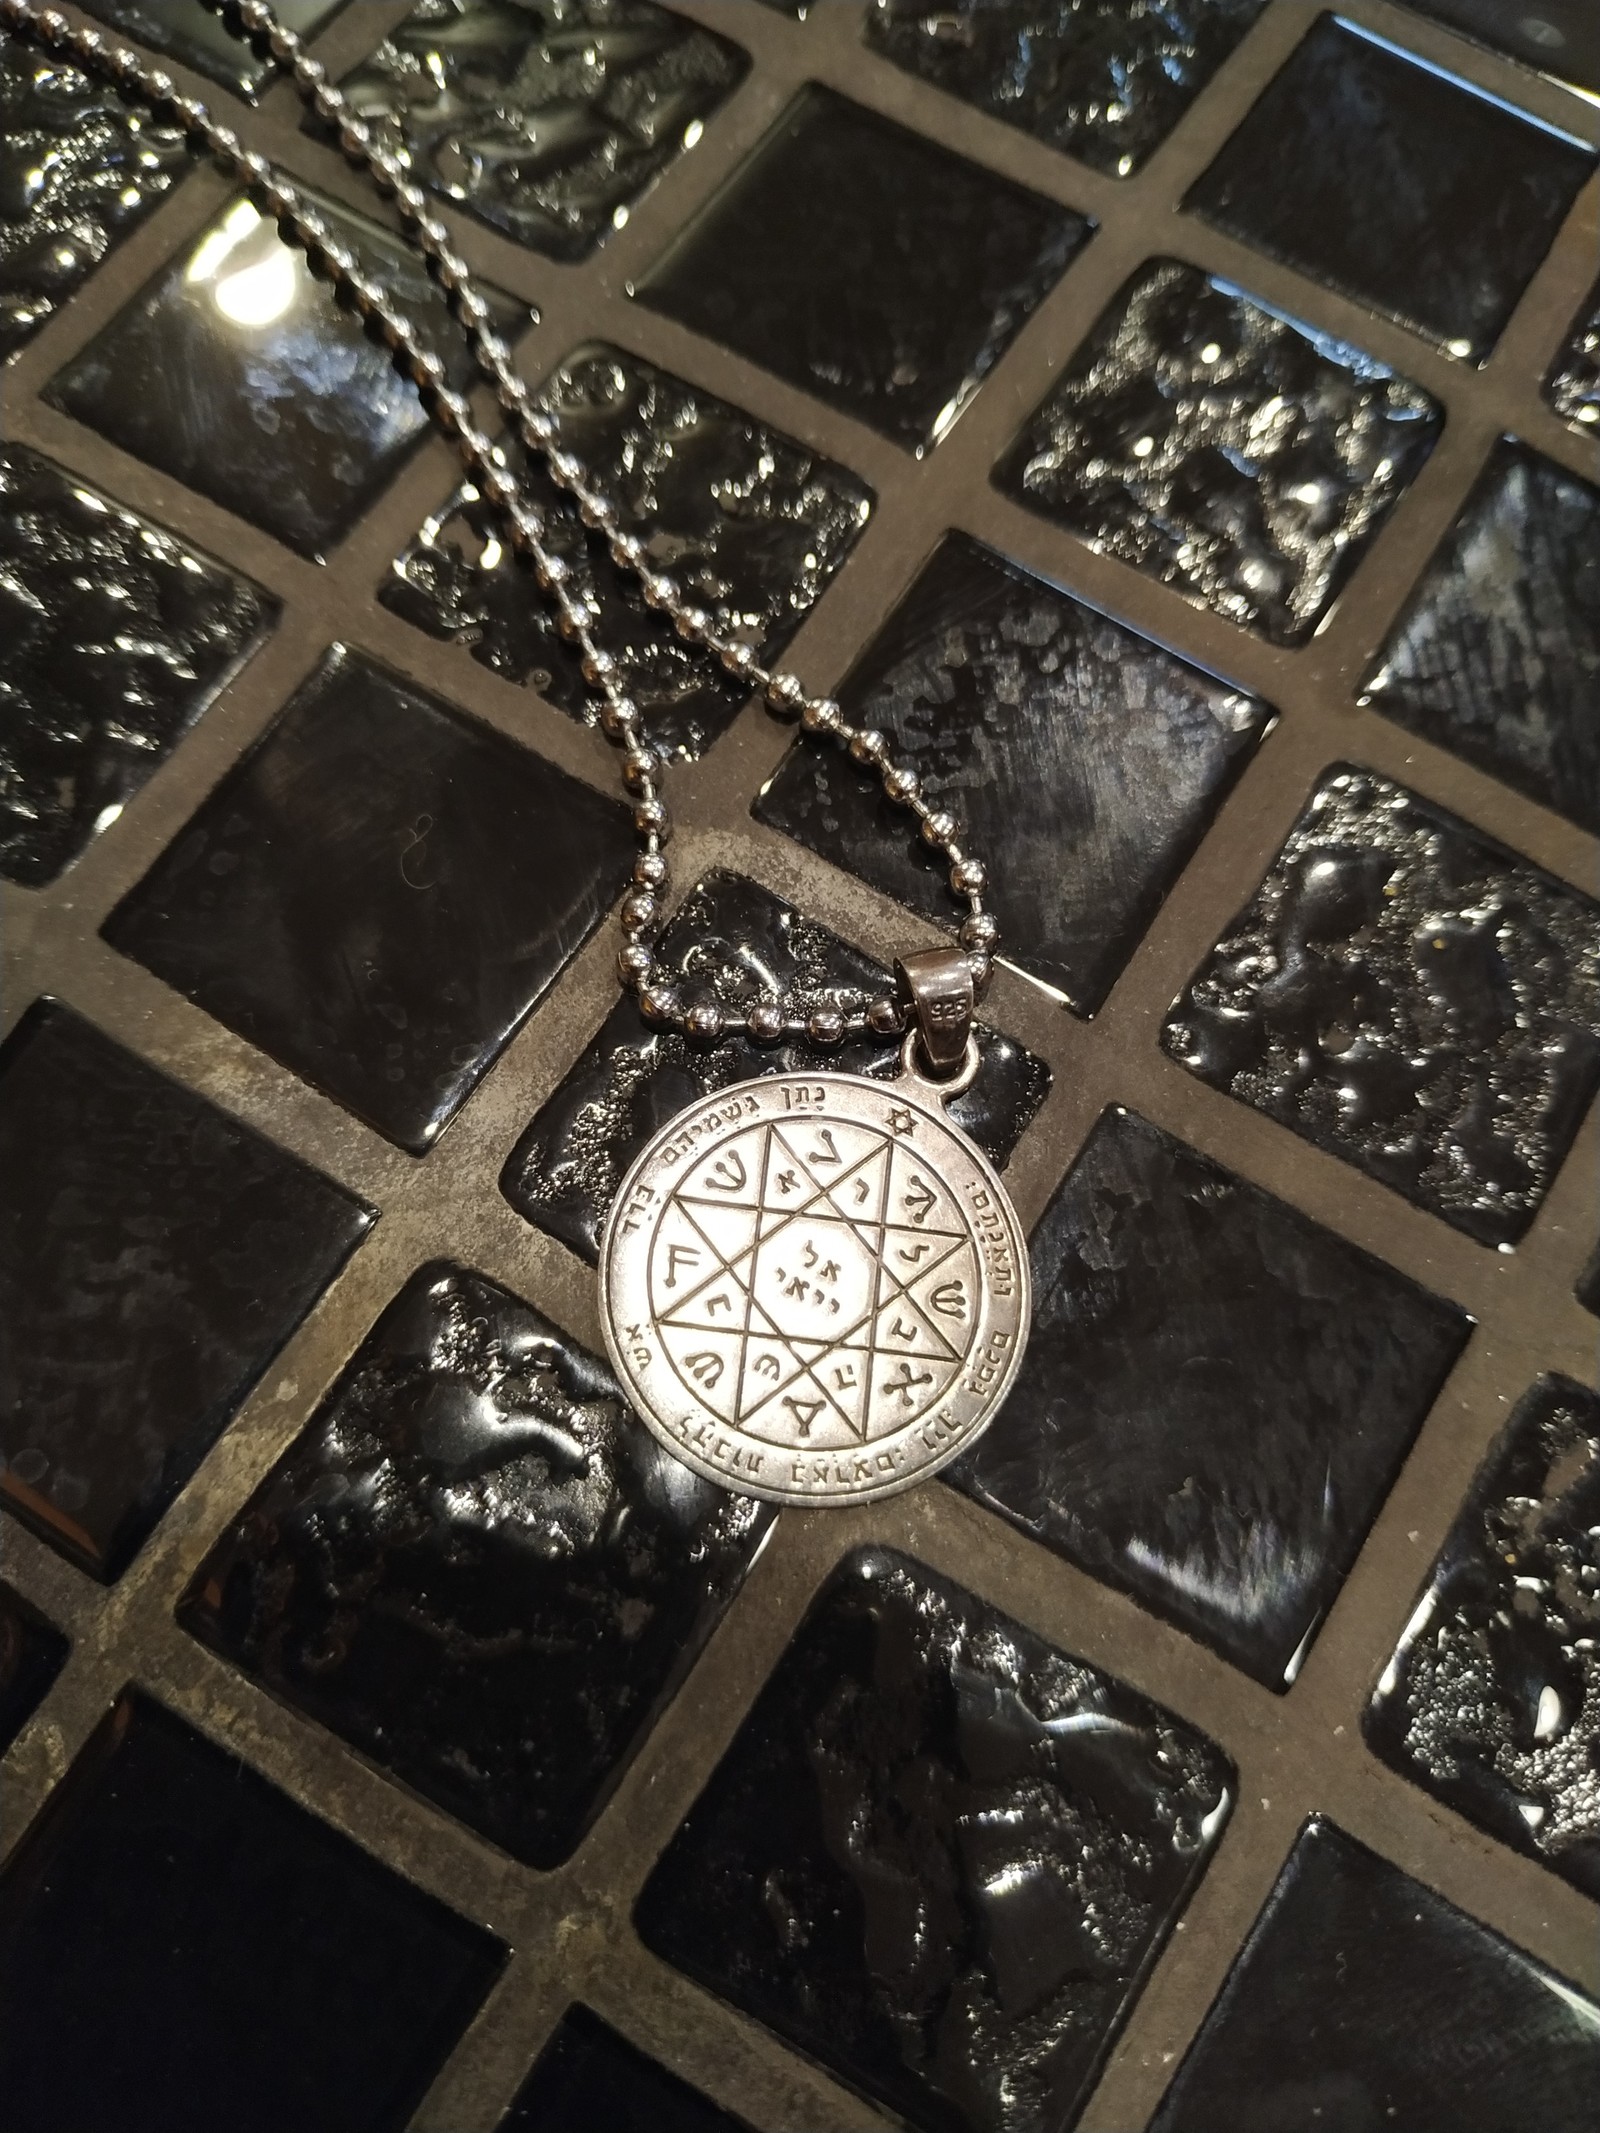 Can you tell me what the medallion is? - Help me find, What's this?, Meaning, Star, My